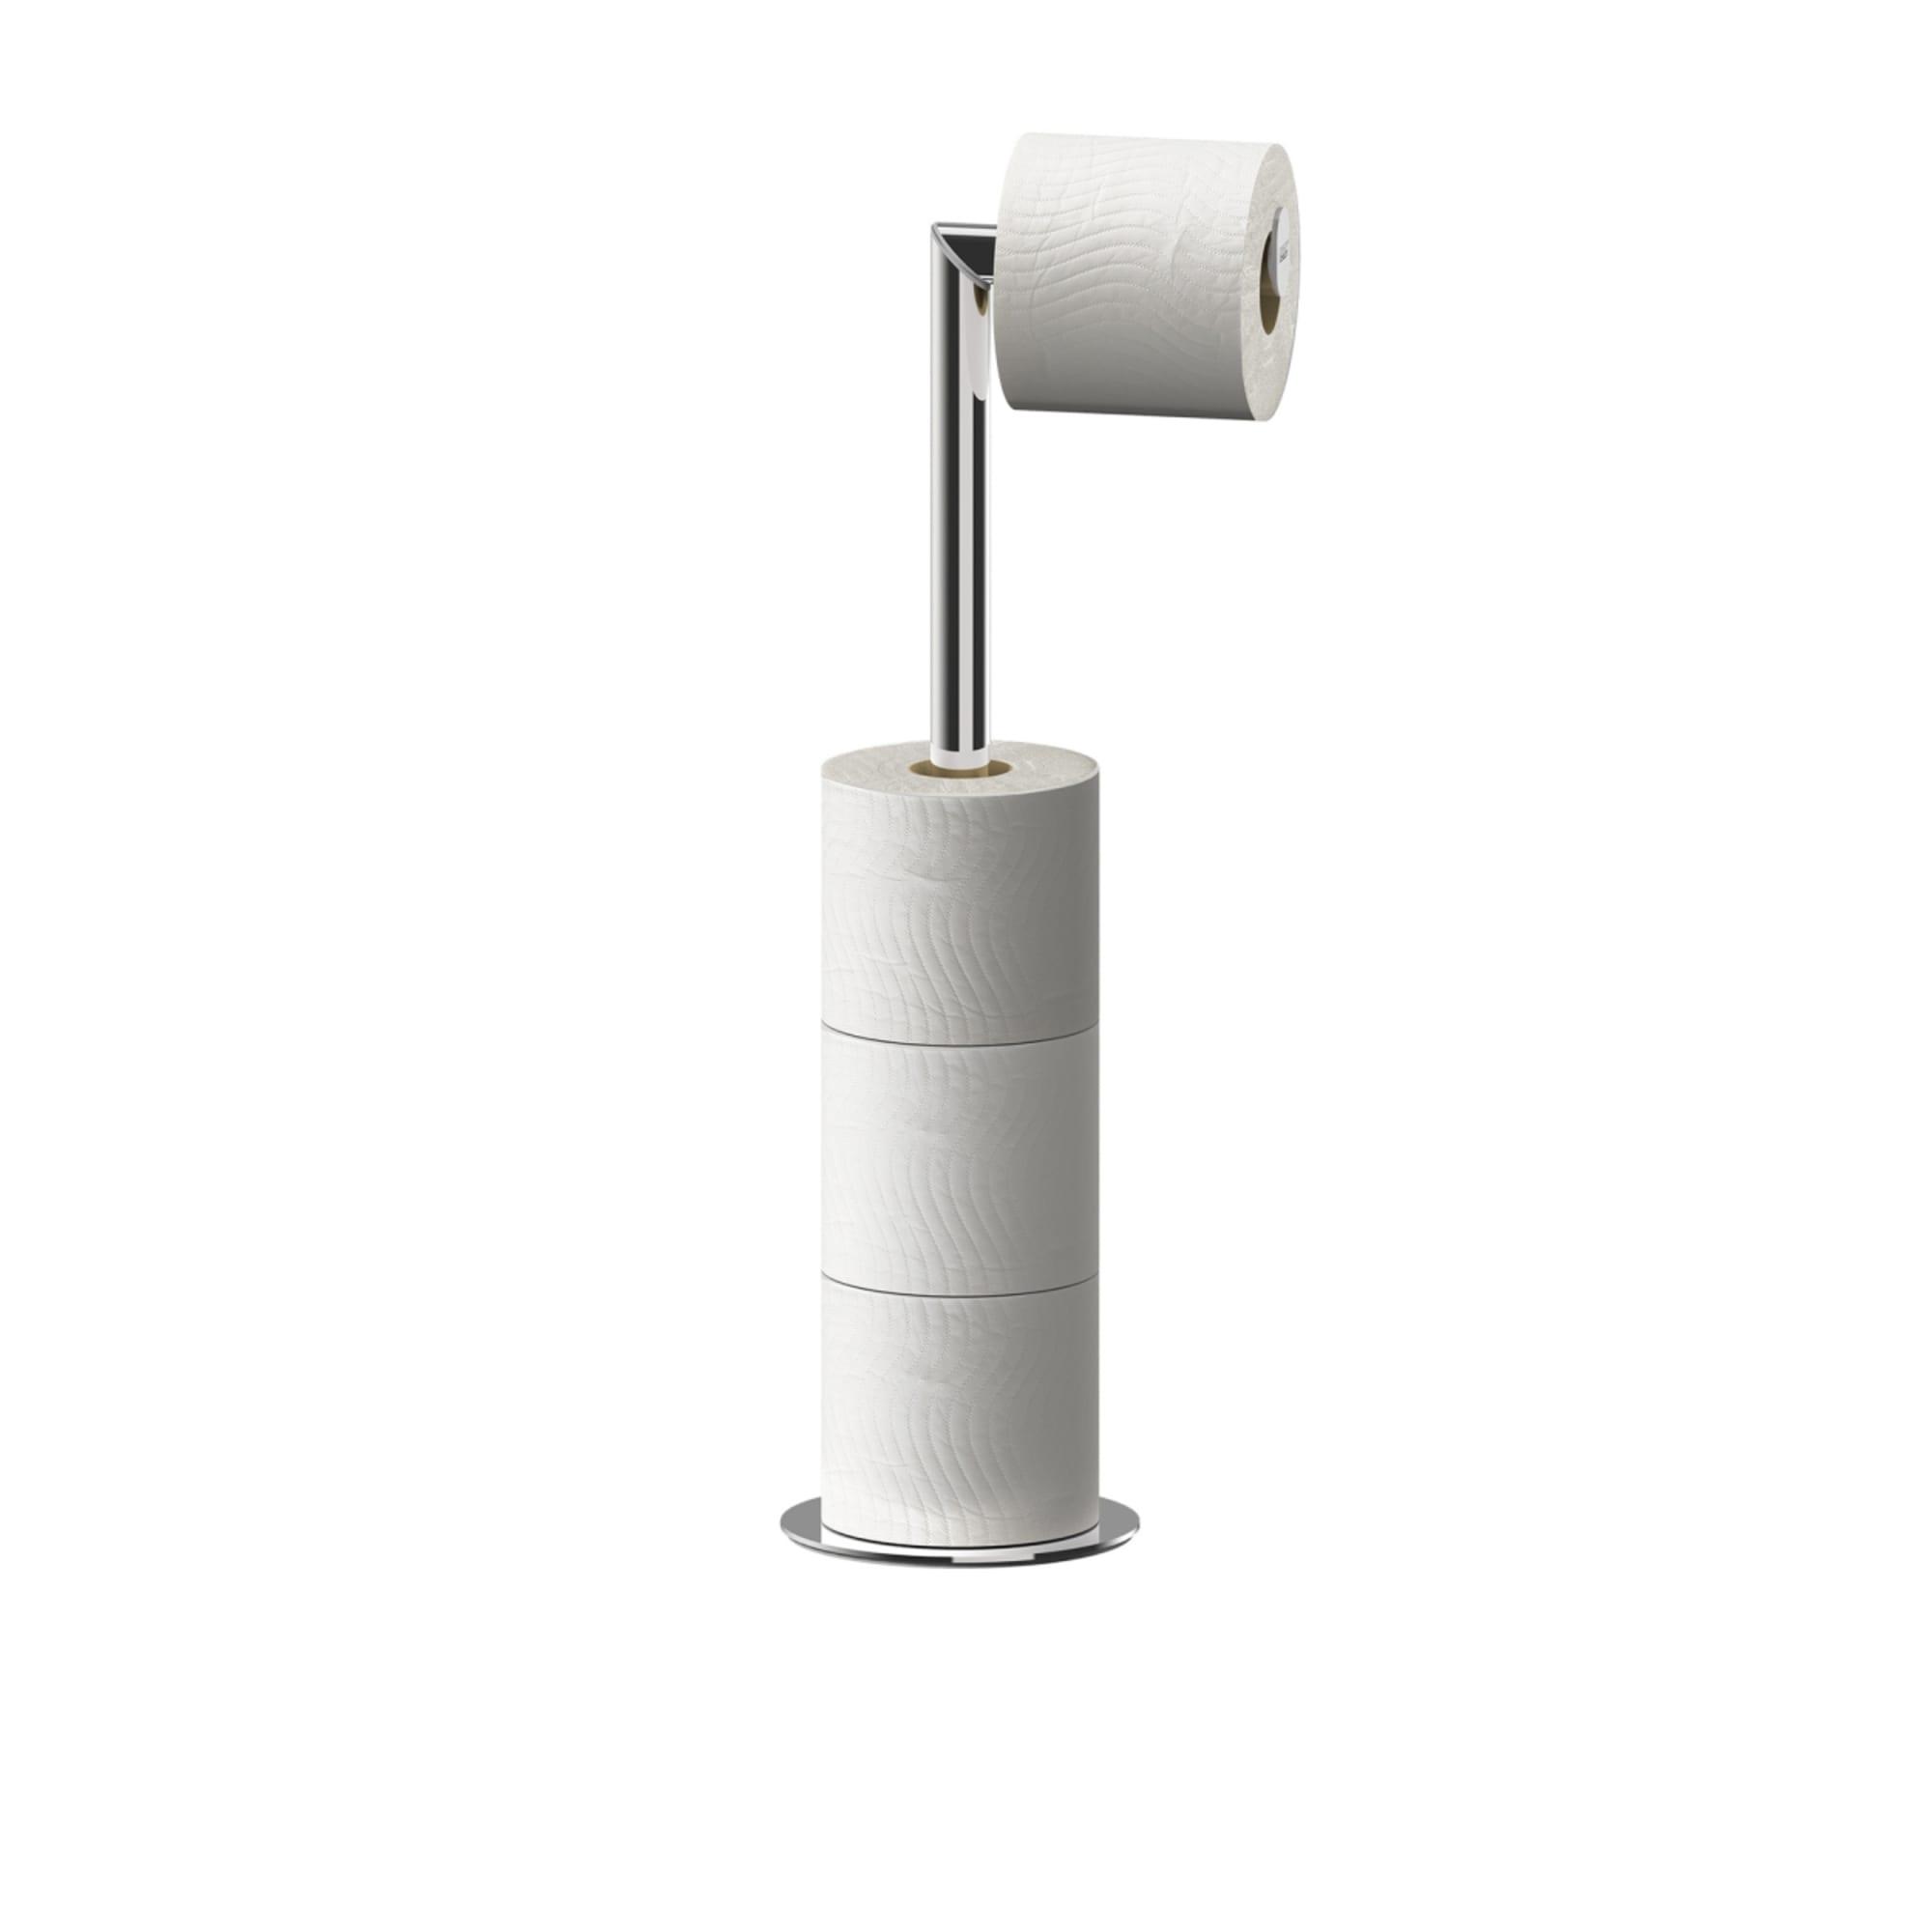 Joseph Joseph EasyStore Luxe 2 in 1 Toilet Roll Stand Image 5